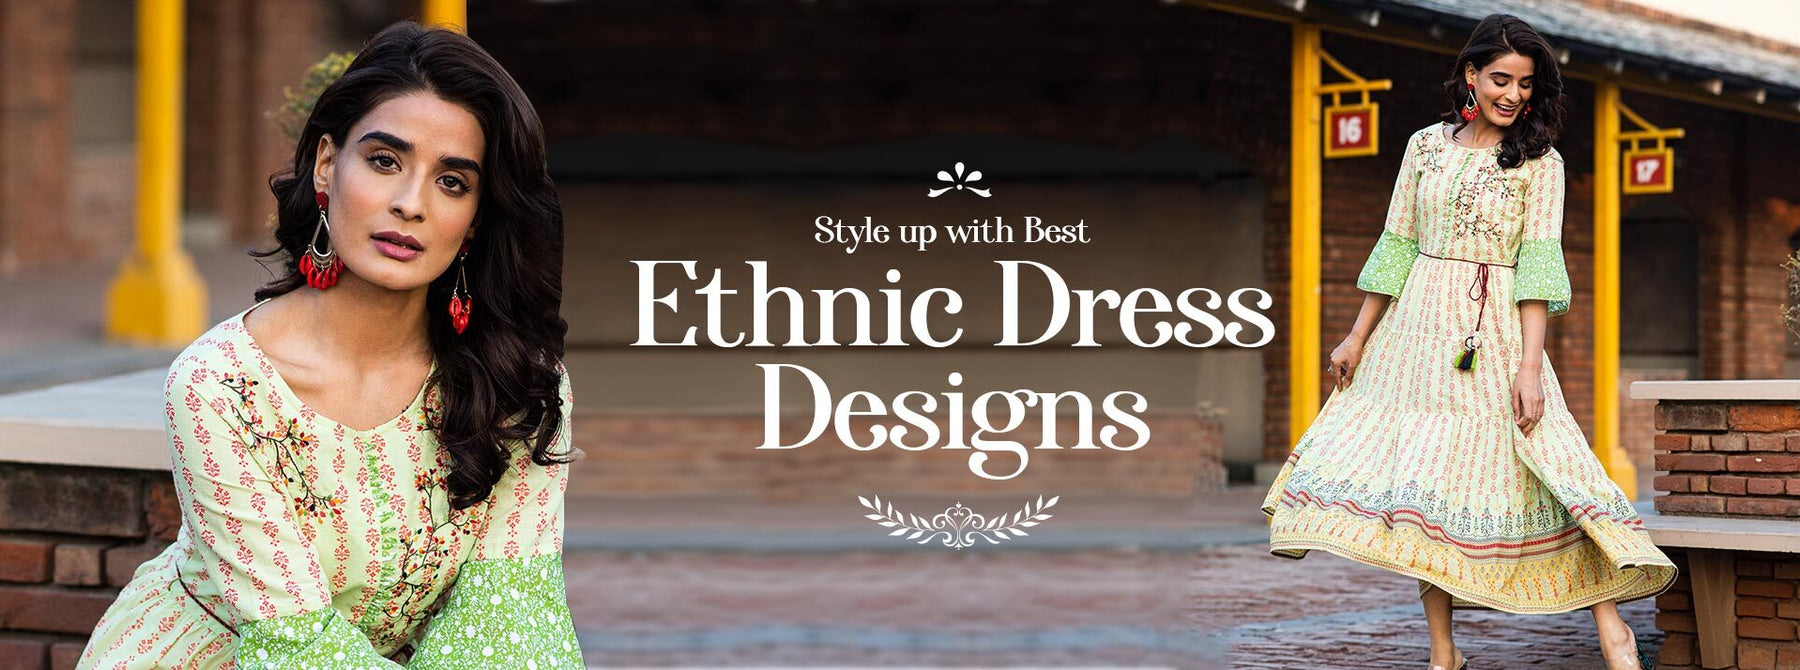 Style Up with Best Ethnic Dress Designs This Summer